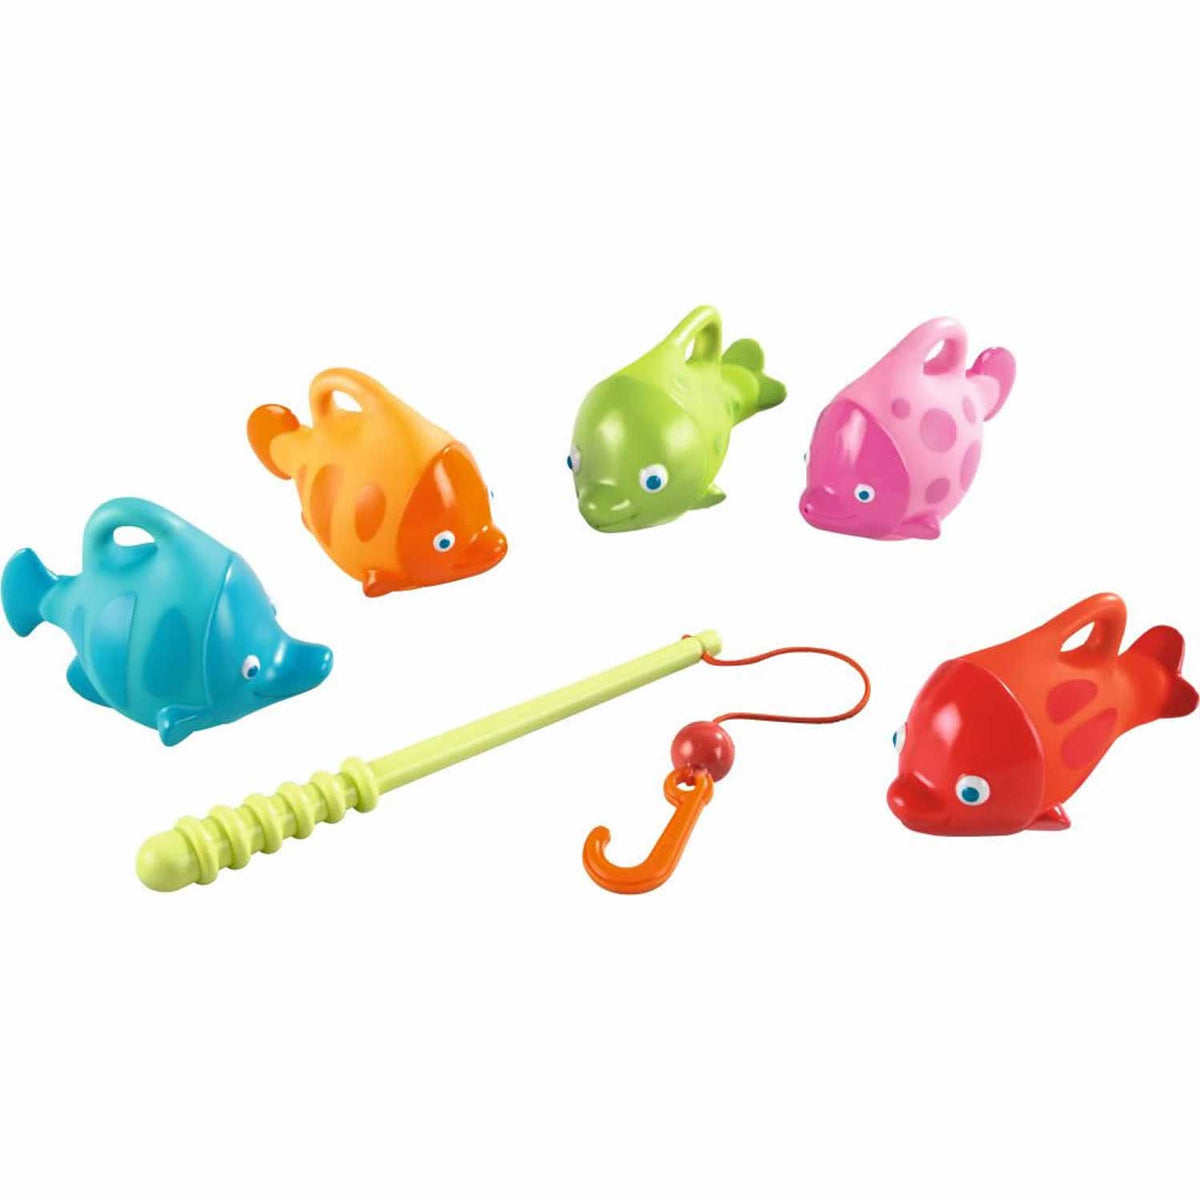 HABA Ocean Fishing Fun Bath Toy with 5 Squirting Fish – Baby Go Round, Inc.